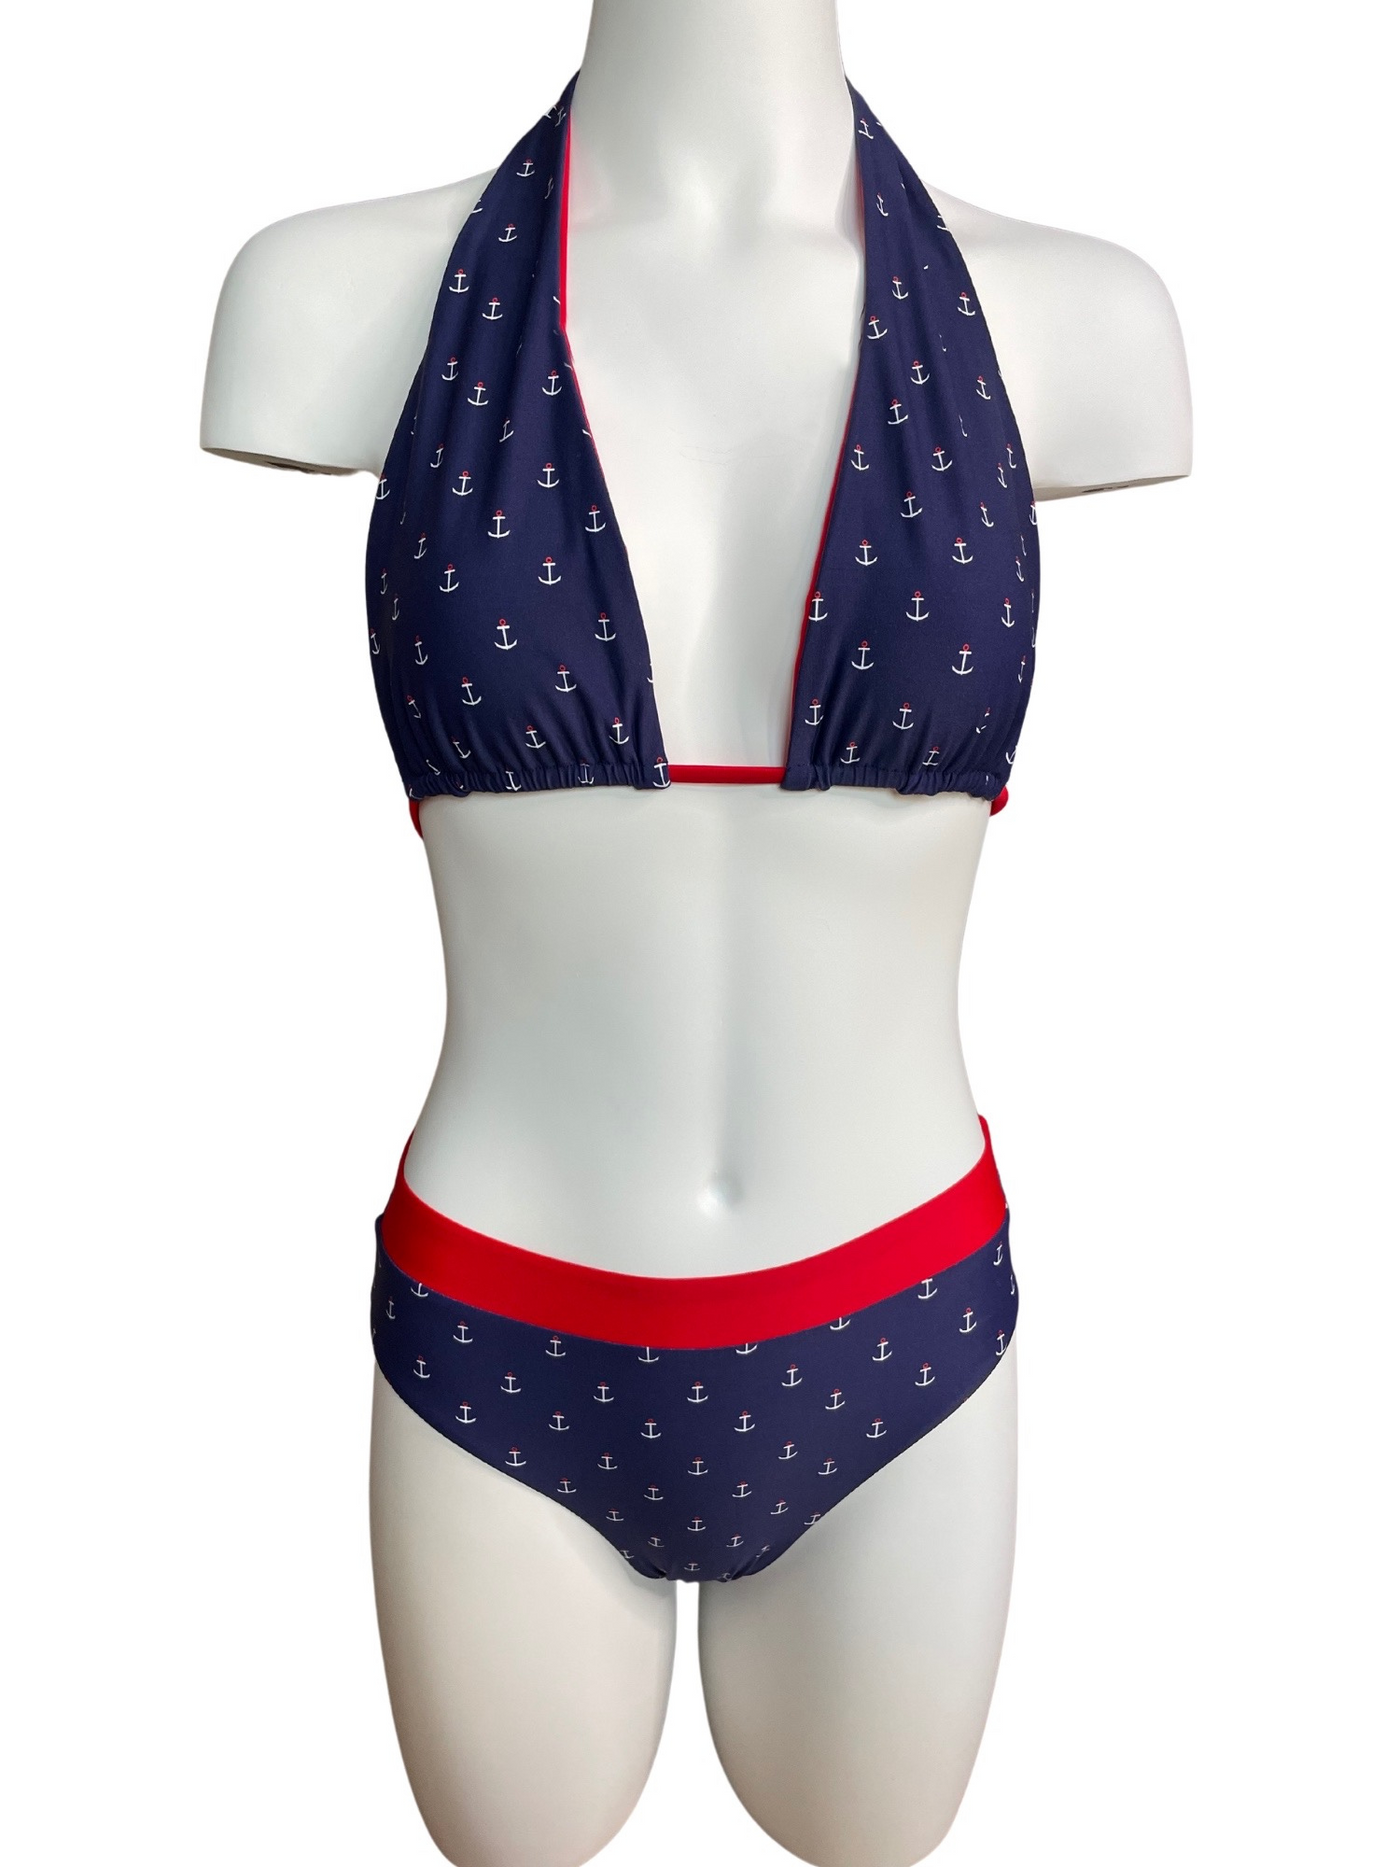 Navalora Matching Swimsuits for Couples and Matching Swimsuits for Families Women's Red White and Blue Anchors Aweigh Sporty Bikini Bottom